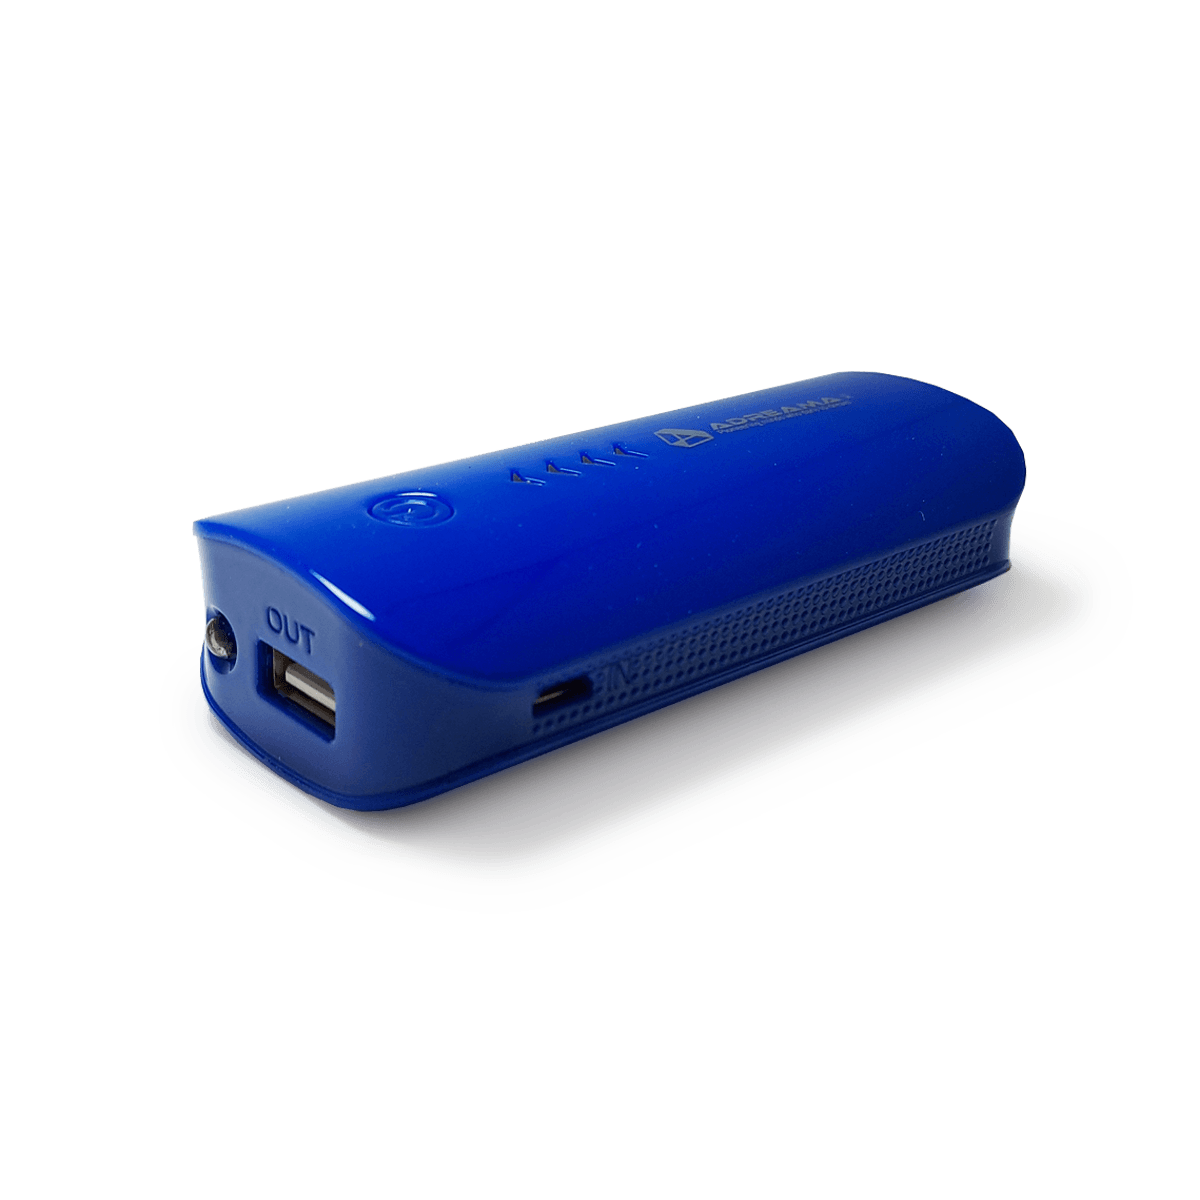 6000mAh Power Bank, Portable Charger with USB-A Port, Blue, Three-quarter Angle View.